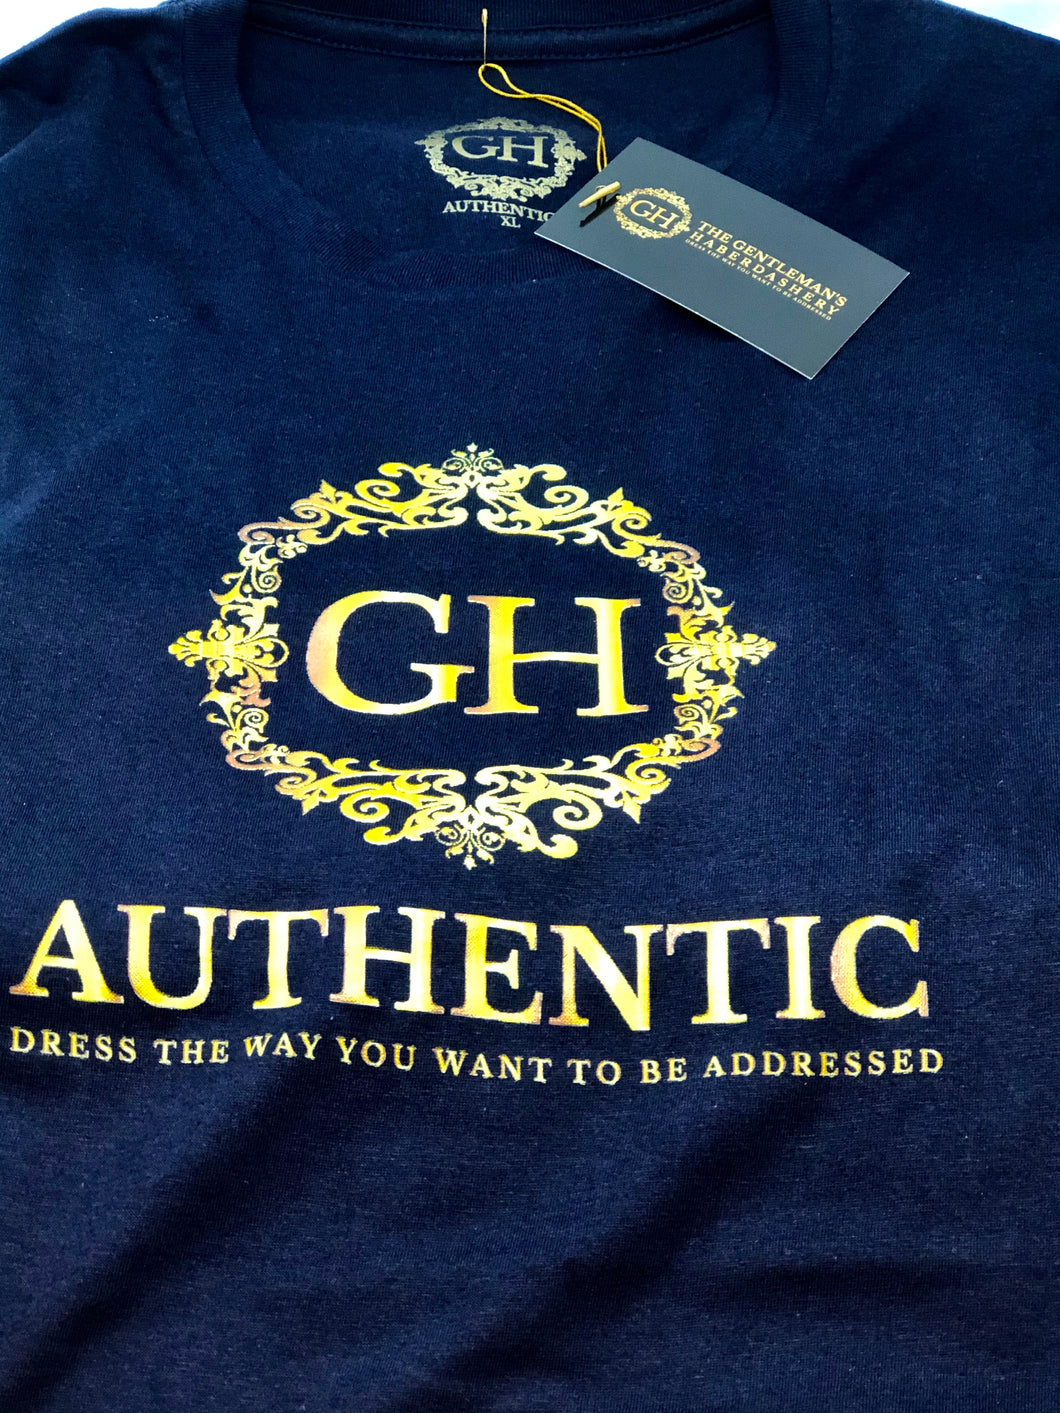 GH Authentic Unisex Navy Blue and Gold Crew Neck T-Shirt